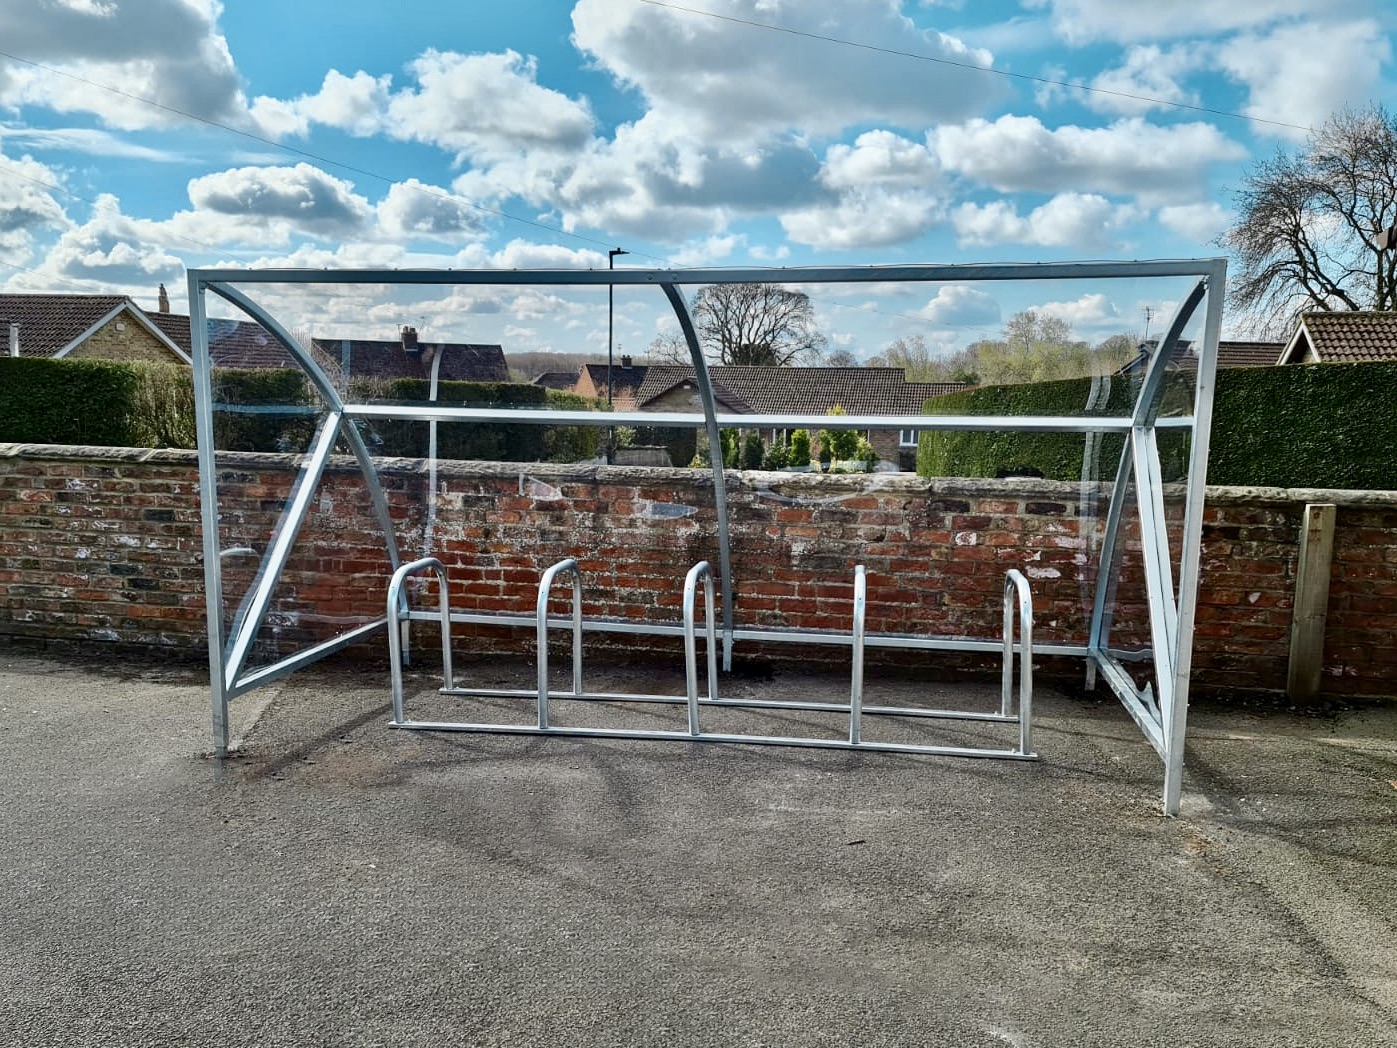 10 space original cycle shelter with toast cycle rack